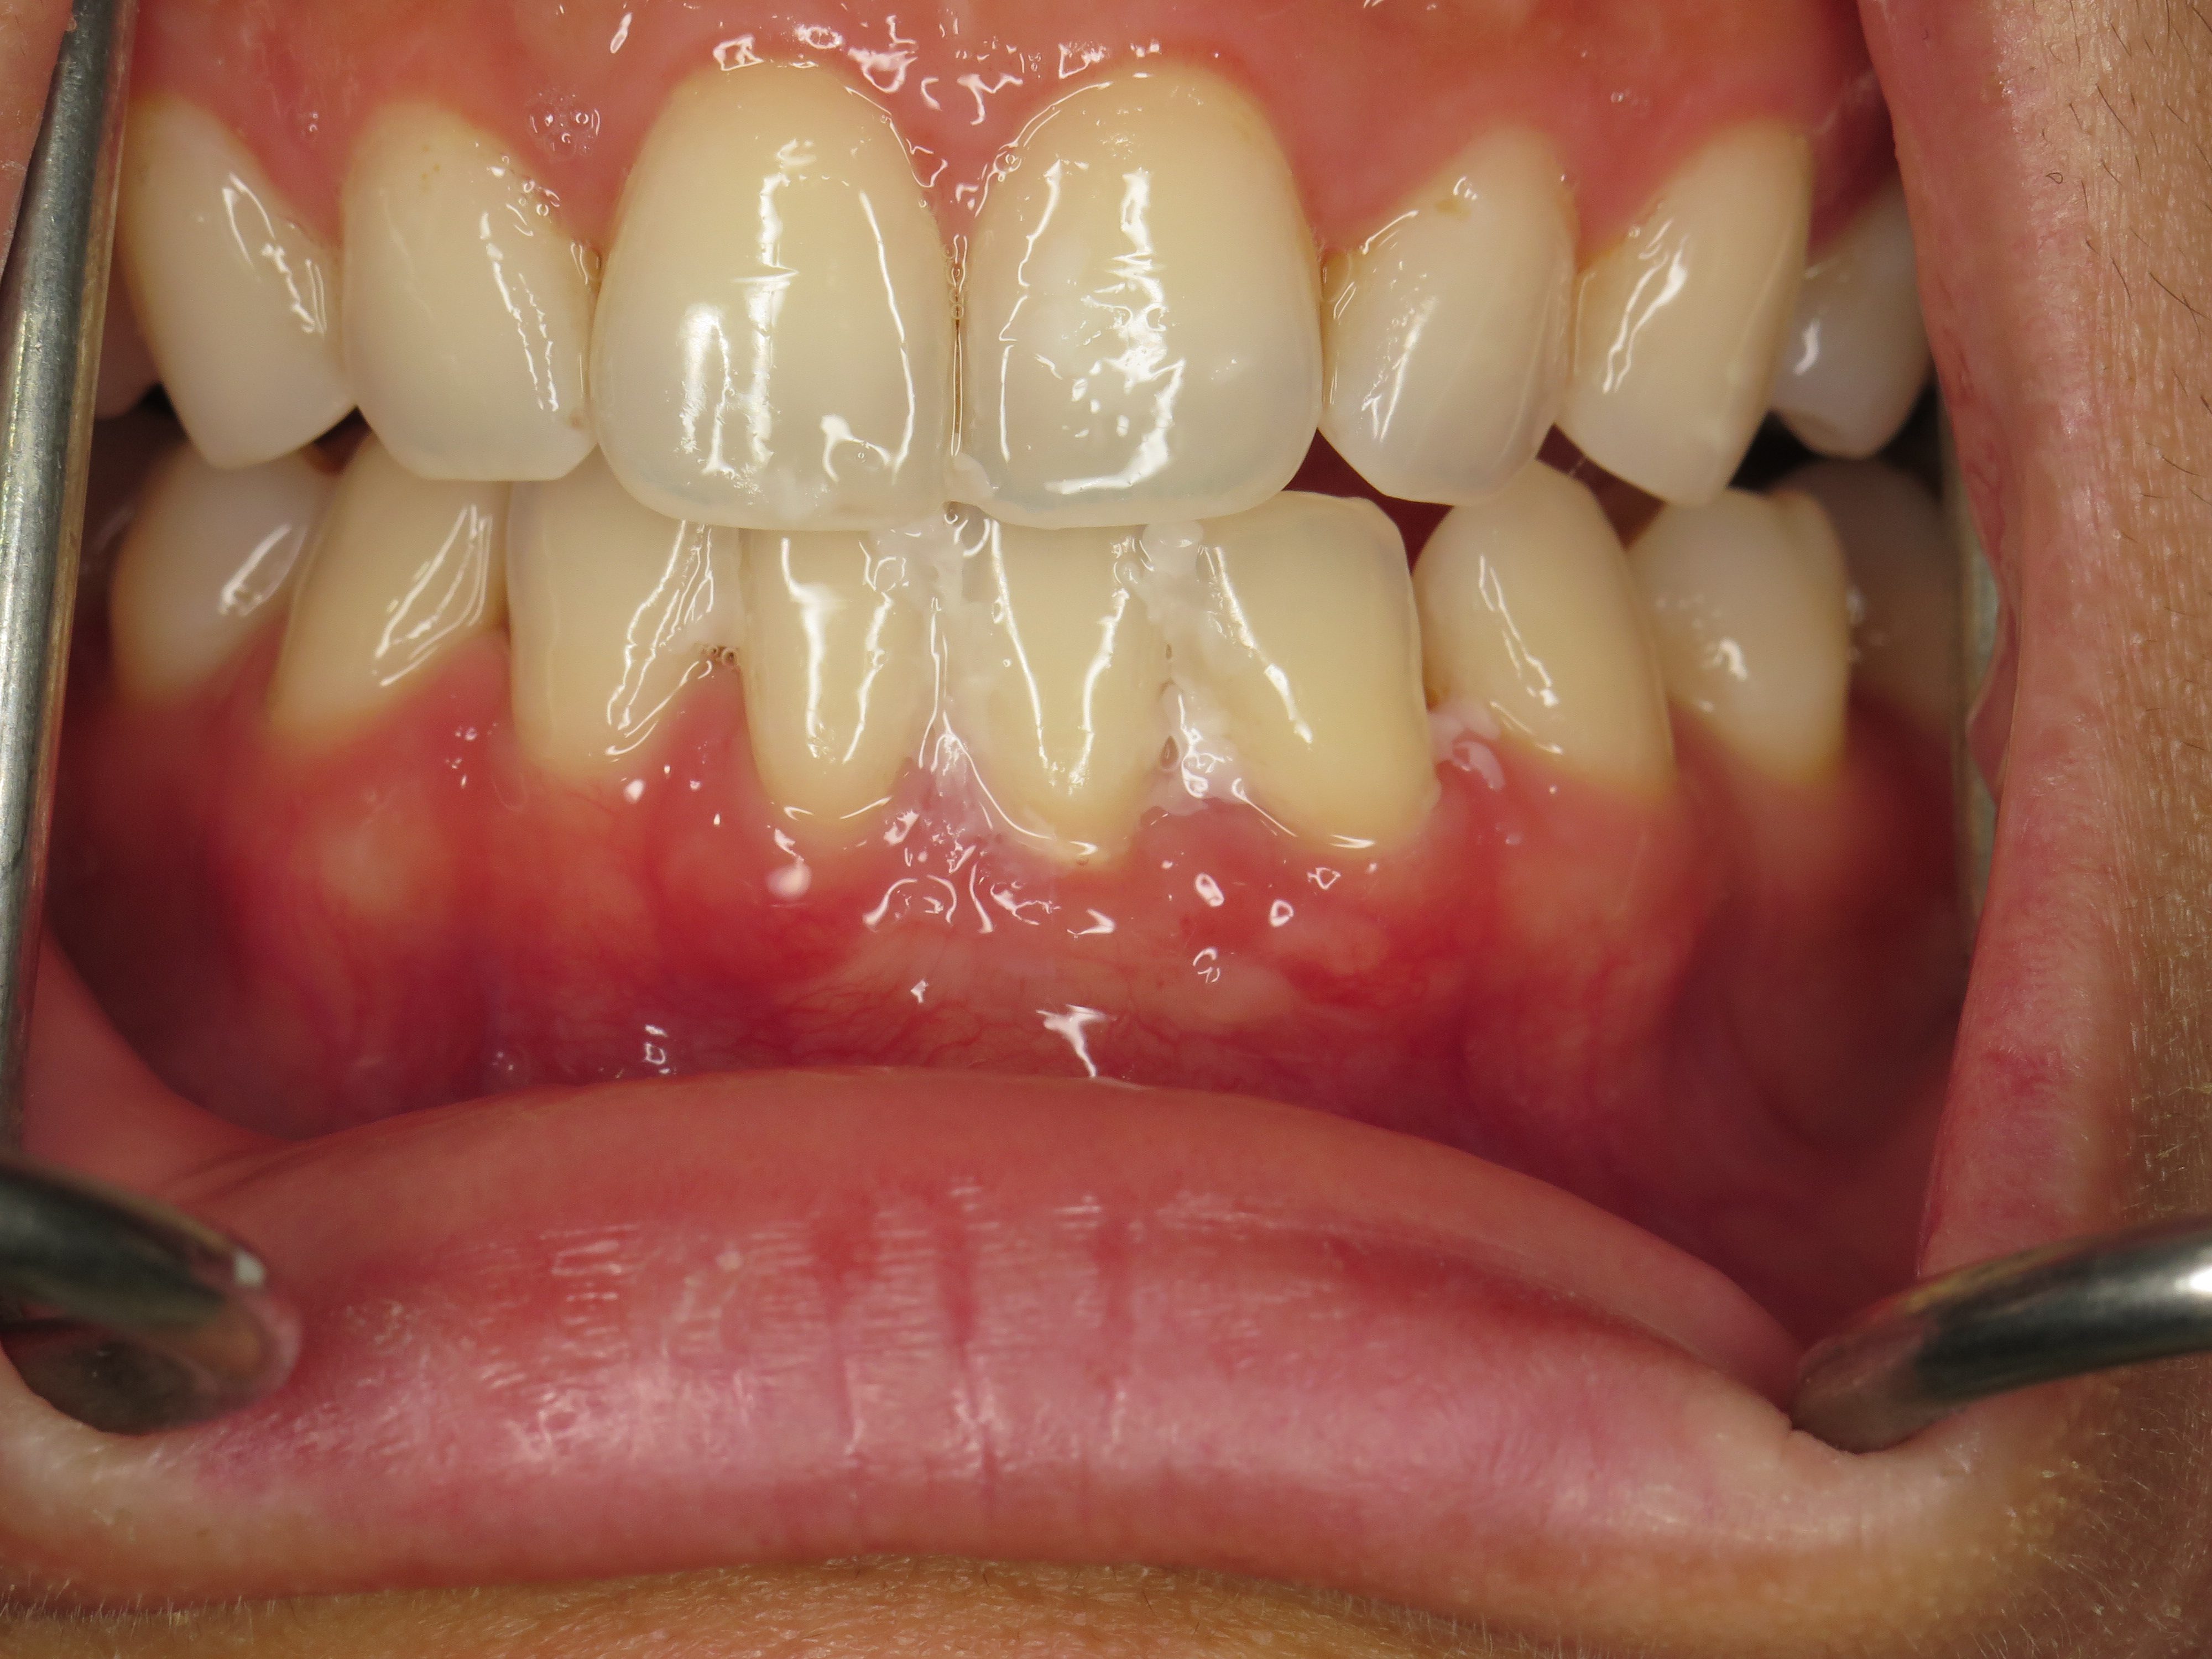 Connective Tissue Graft Used to Treat Gum Recession